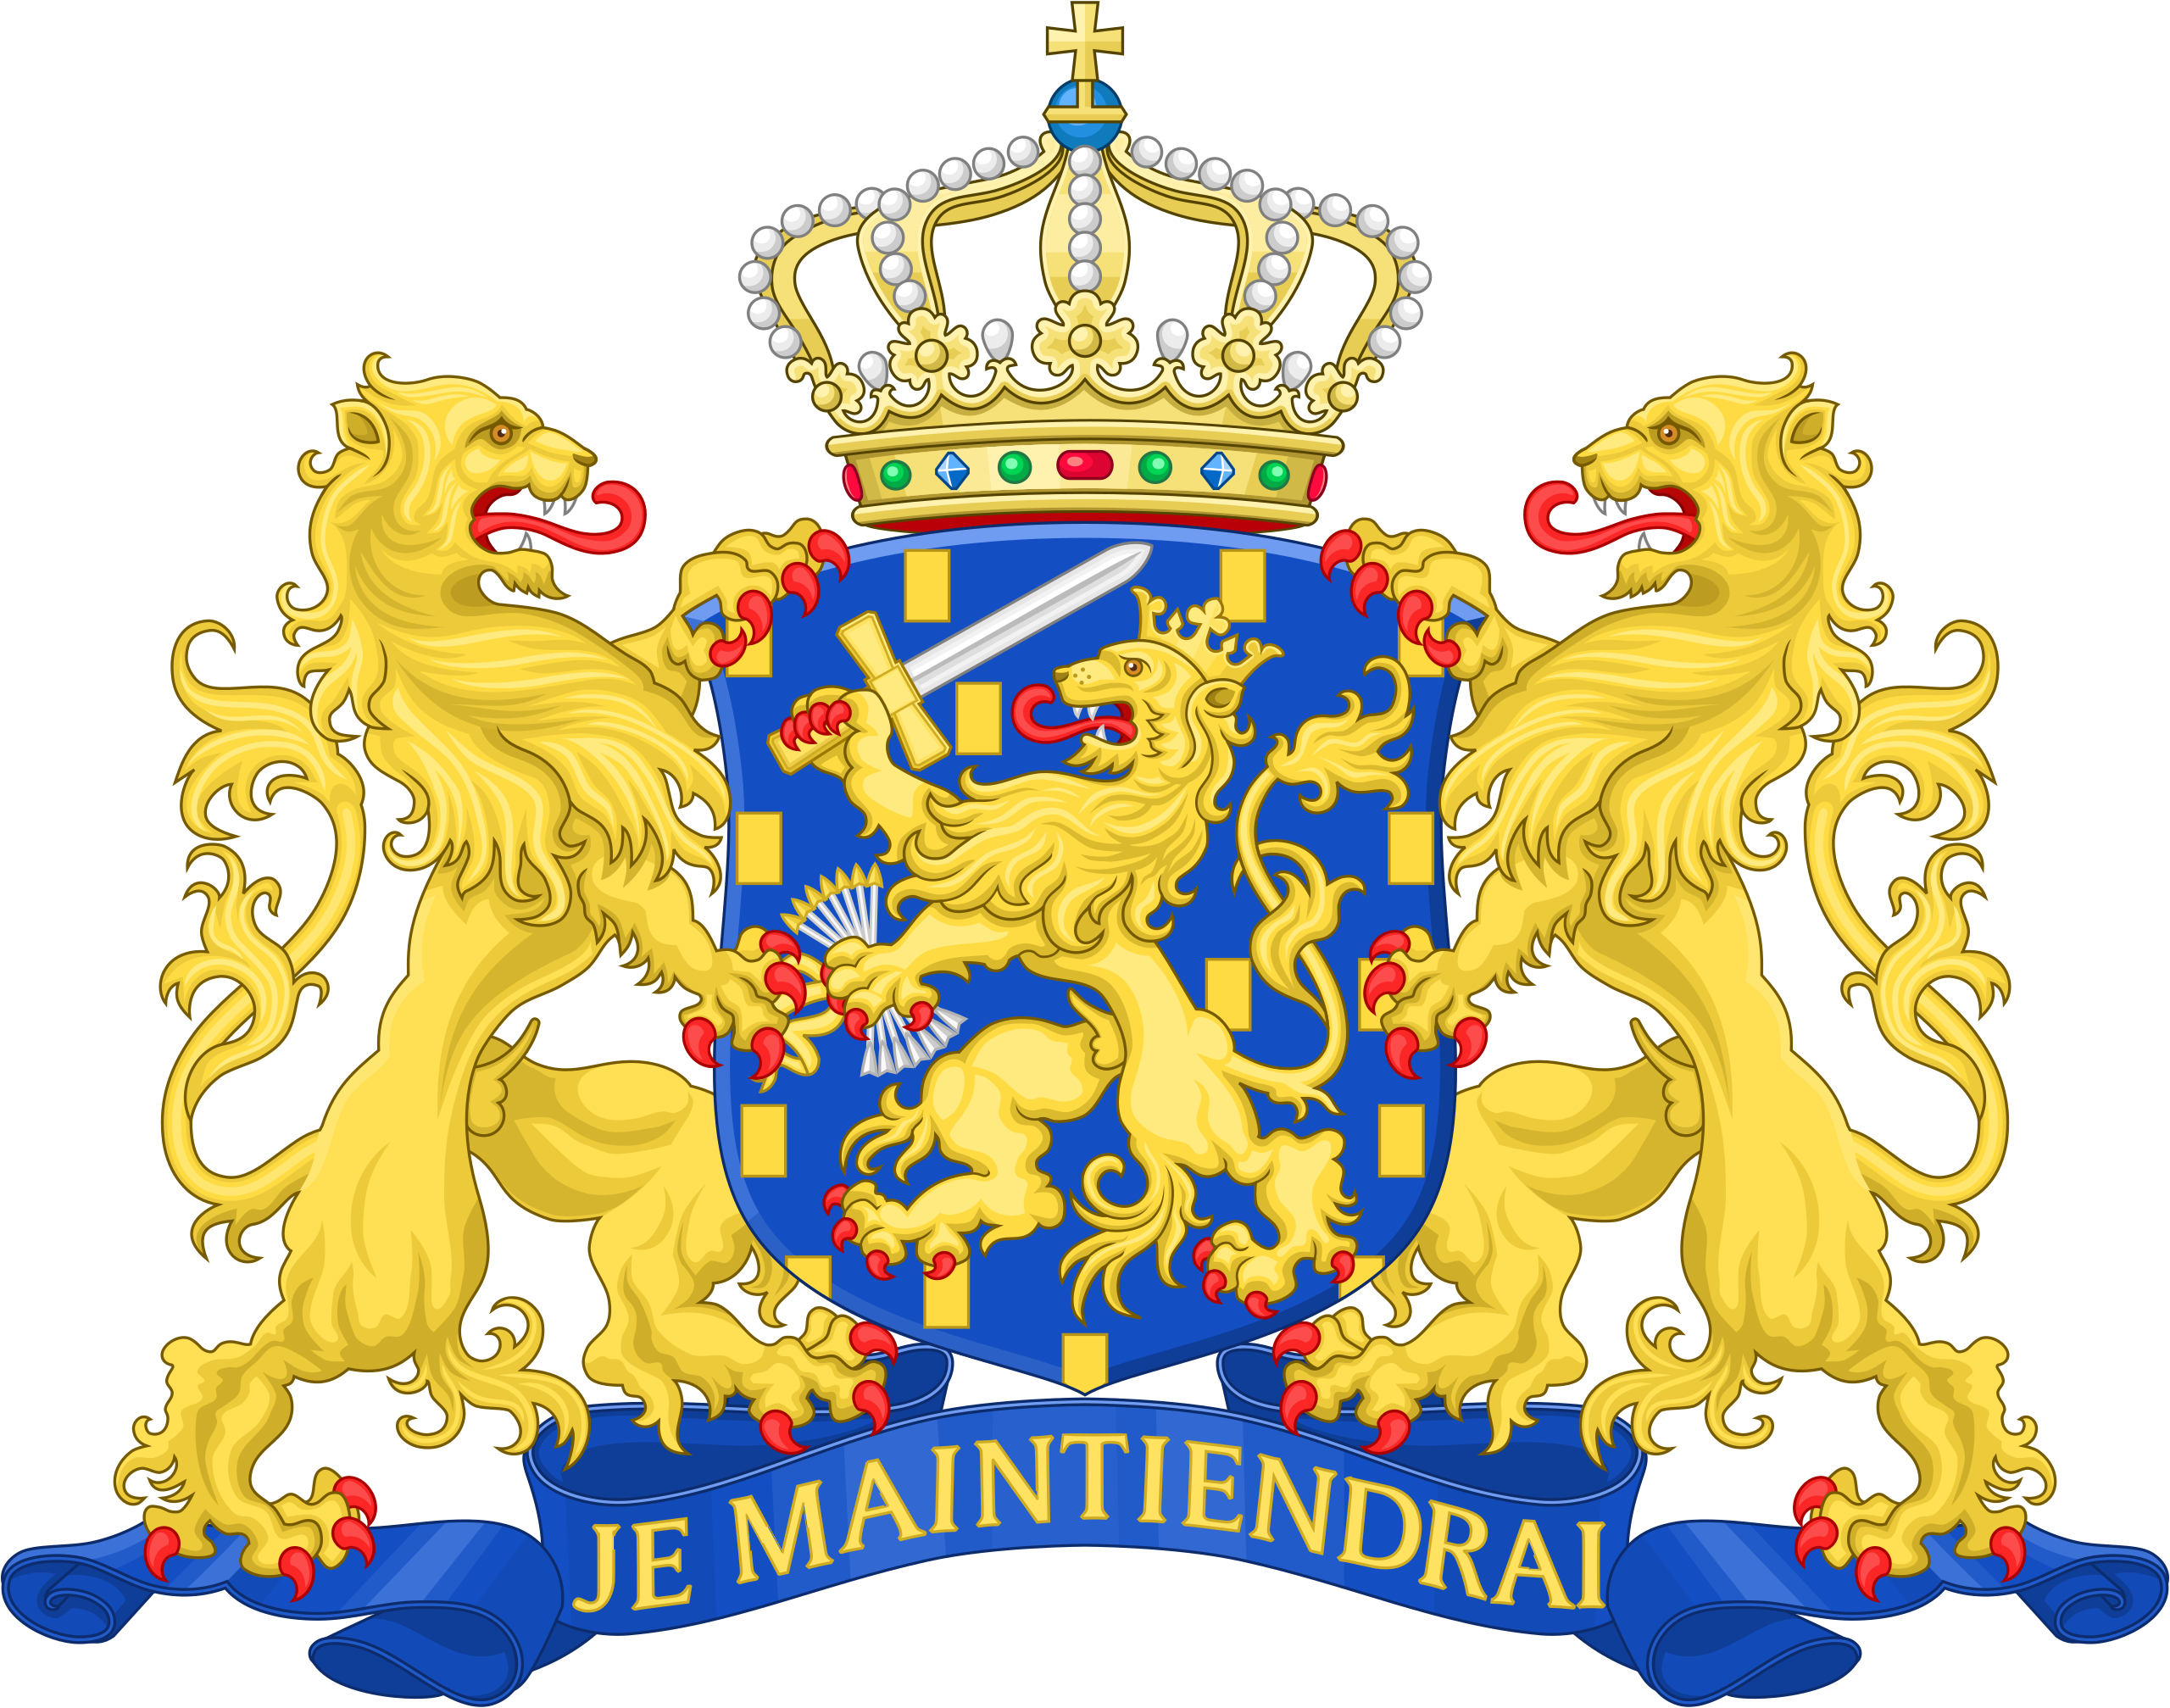 Coat of arms of Kingdom of the Netherlands